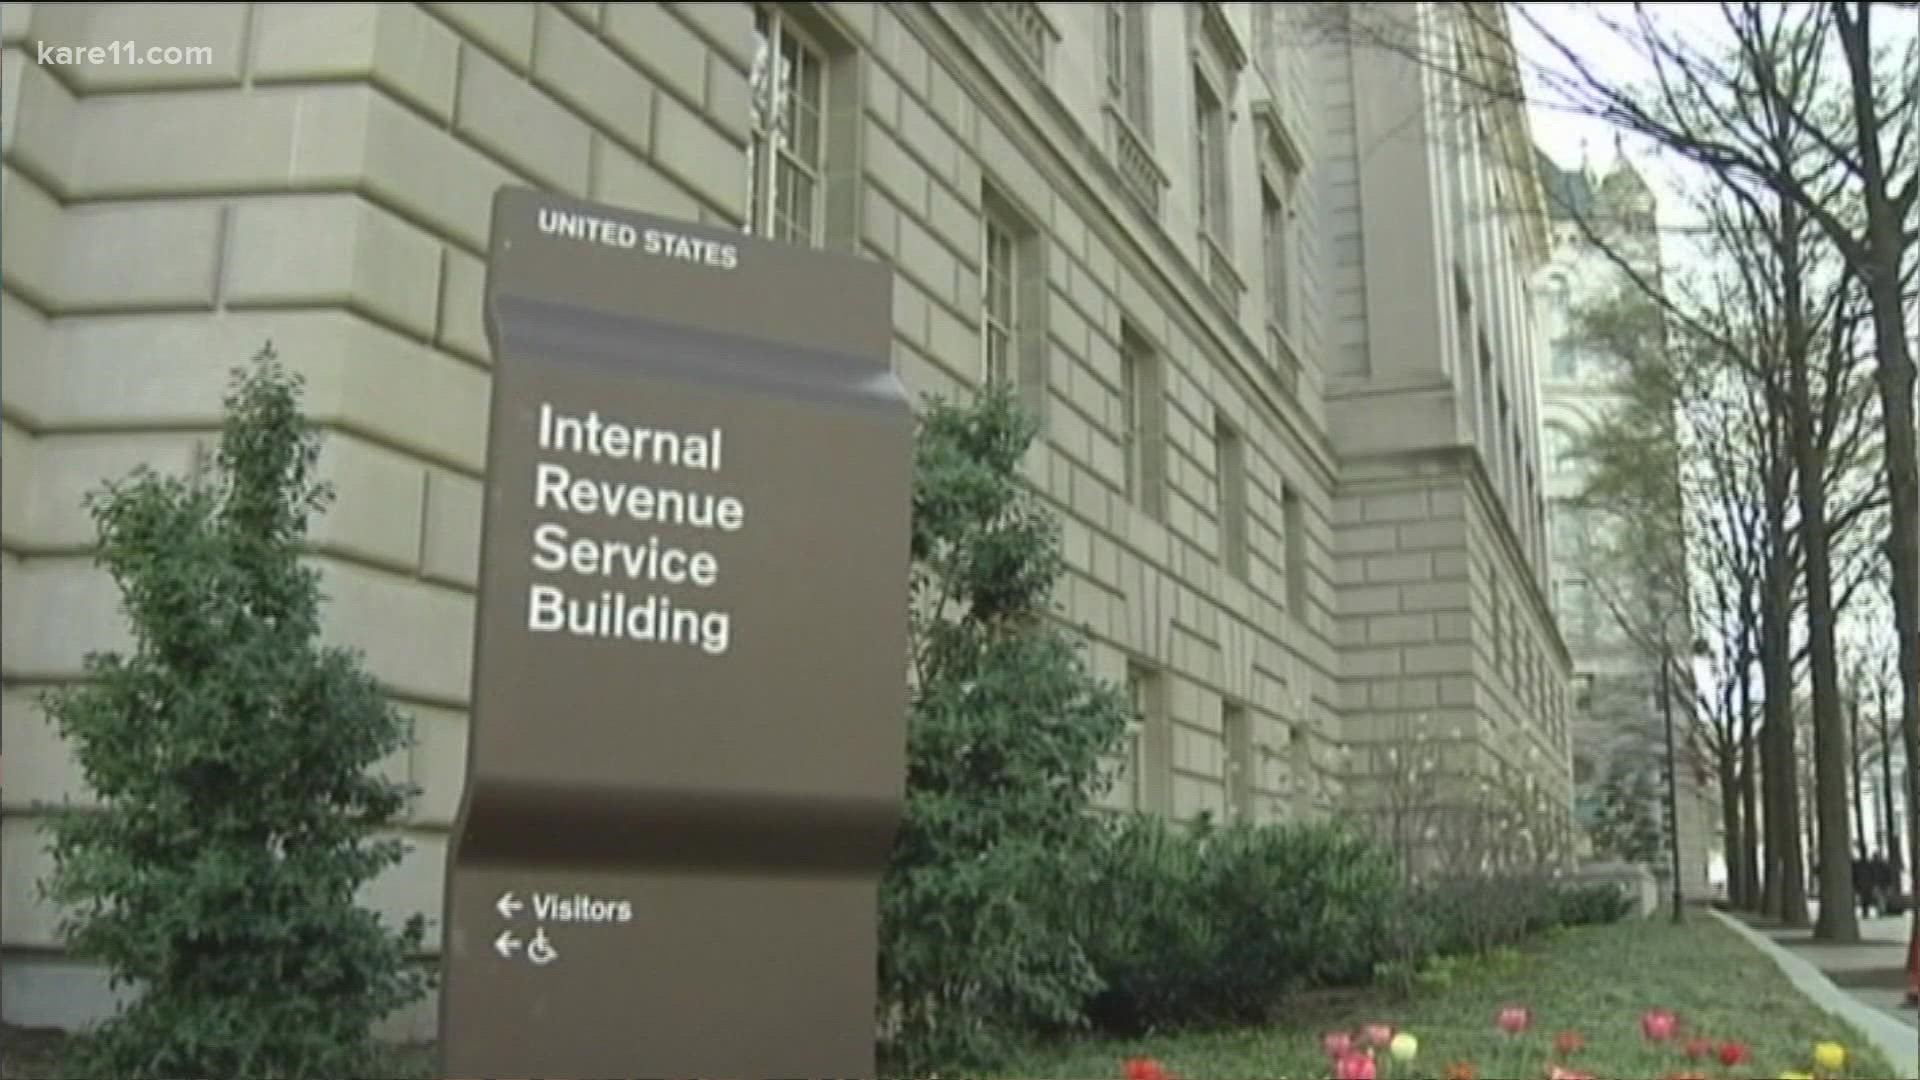 #Sunrisers react to a report that says America's Social Security System will run out of funding sooner than expected.